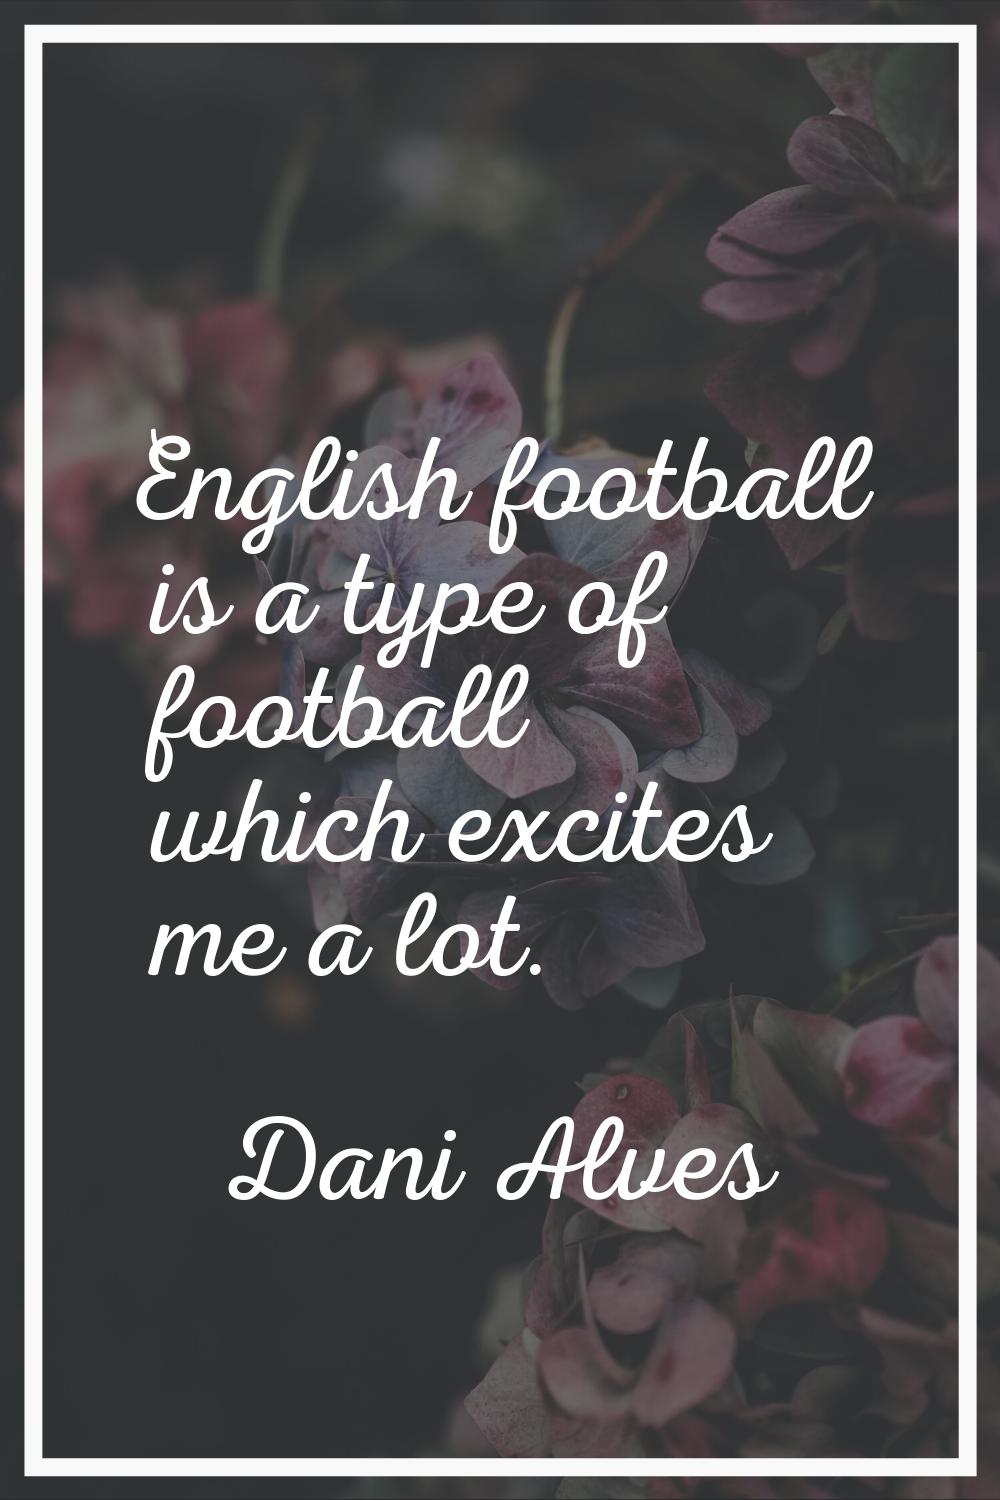 English football is a type of football which excites me a lot.